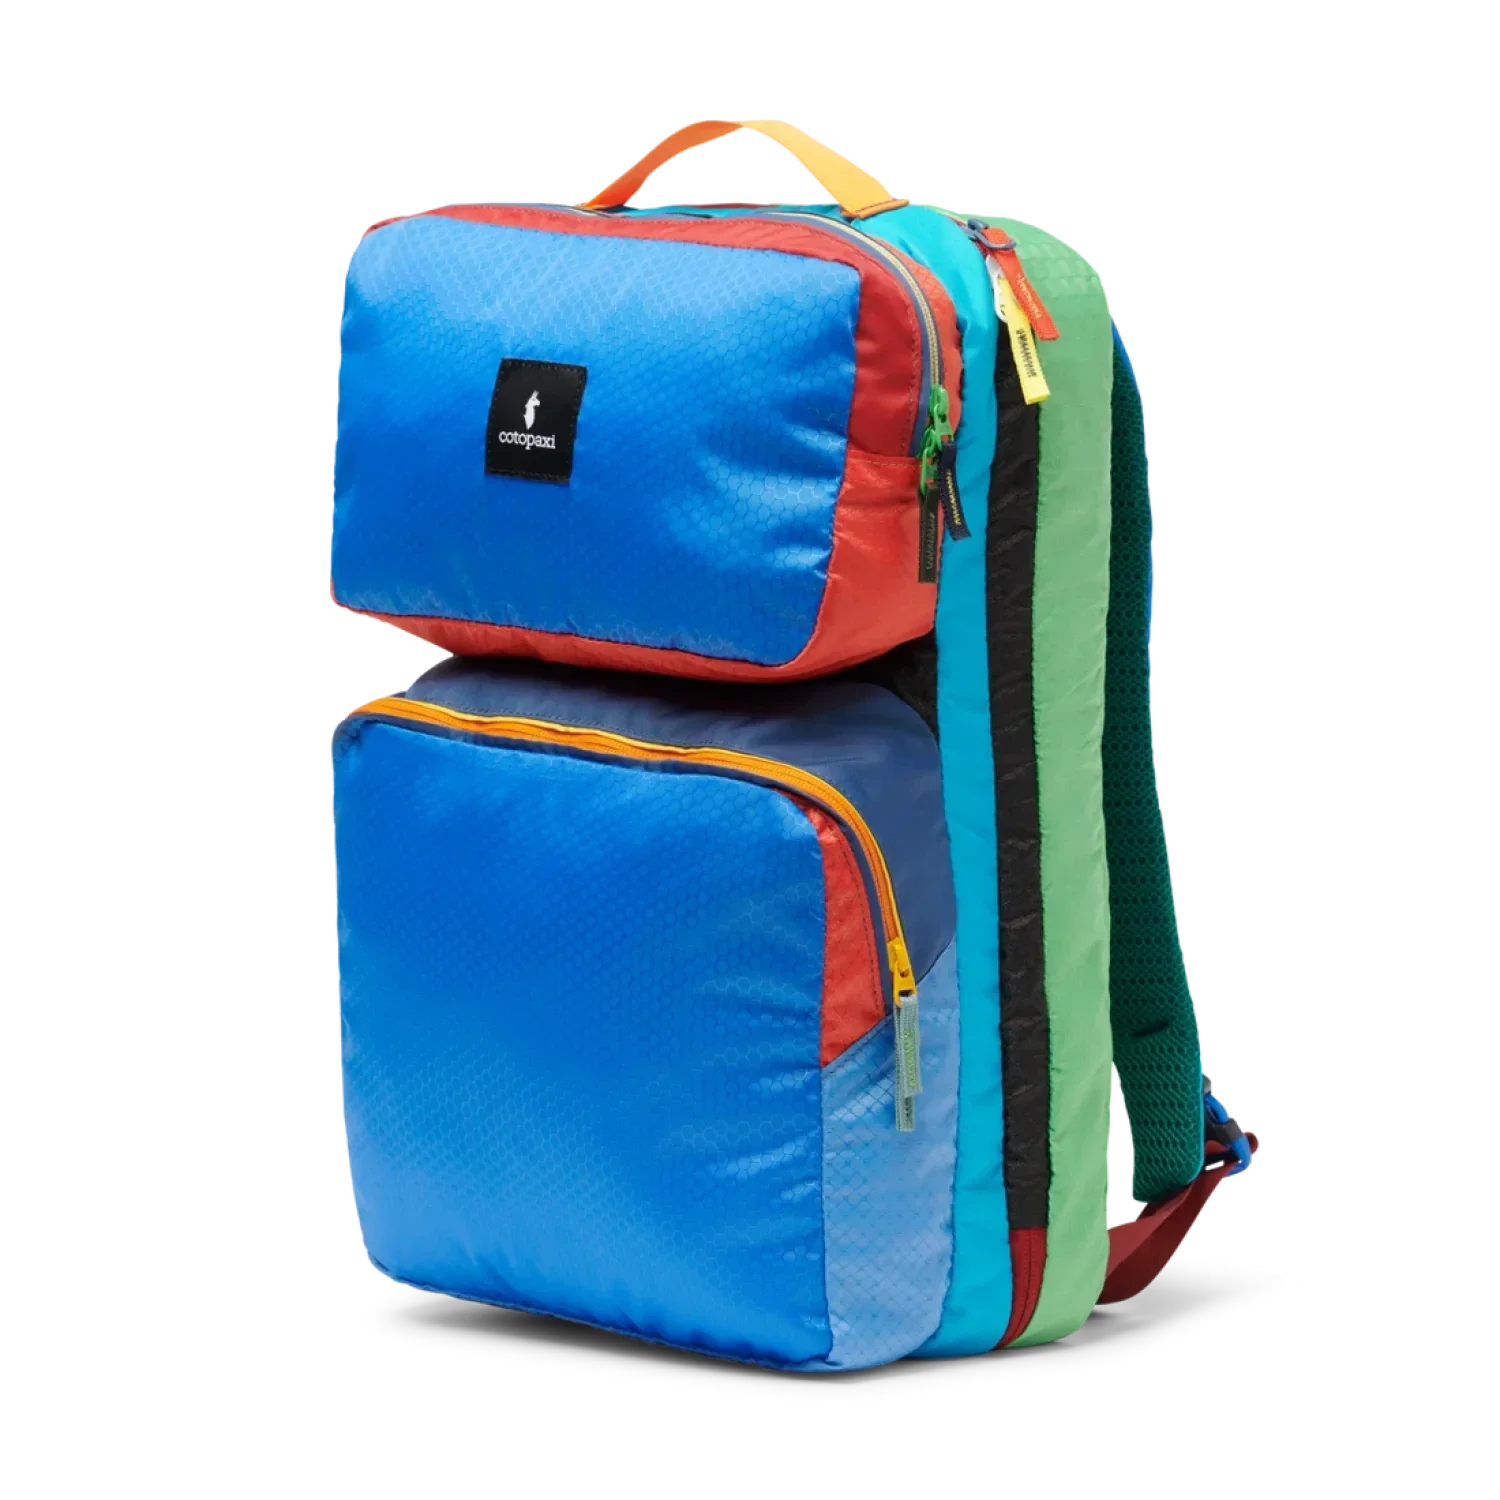 COTOPAXI PACKS|LUGGAGE - PACK|CASUAL - BACKPACK Tasra 16L Backpack DEL DIA